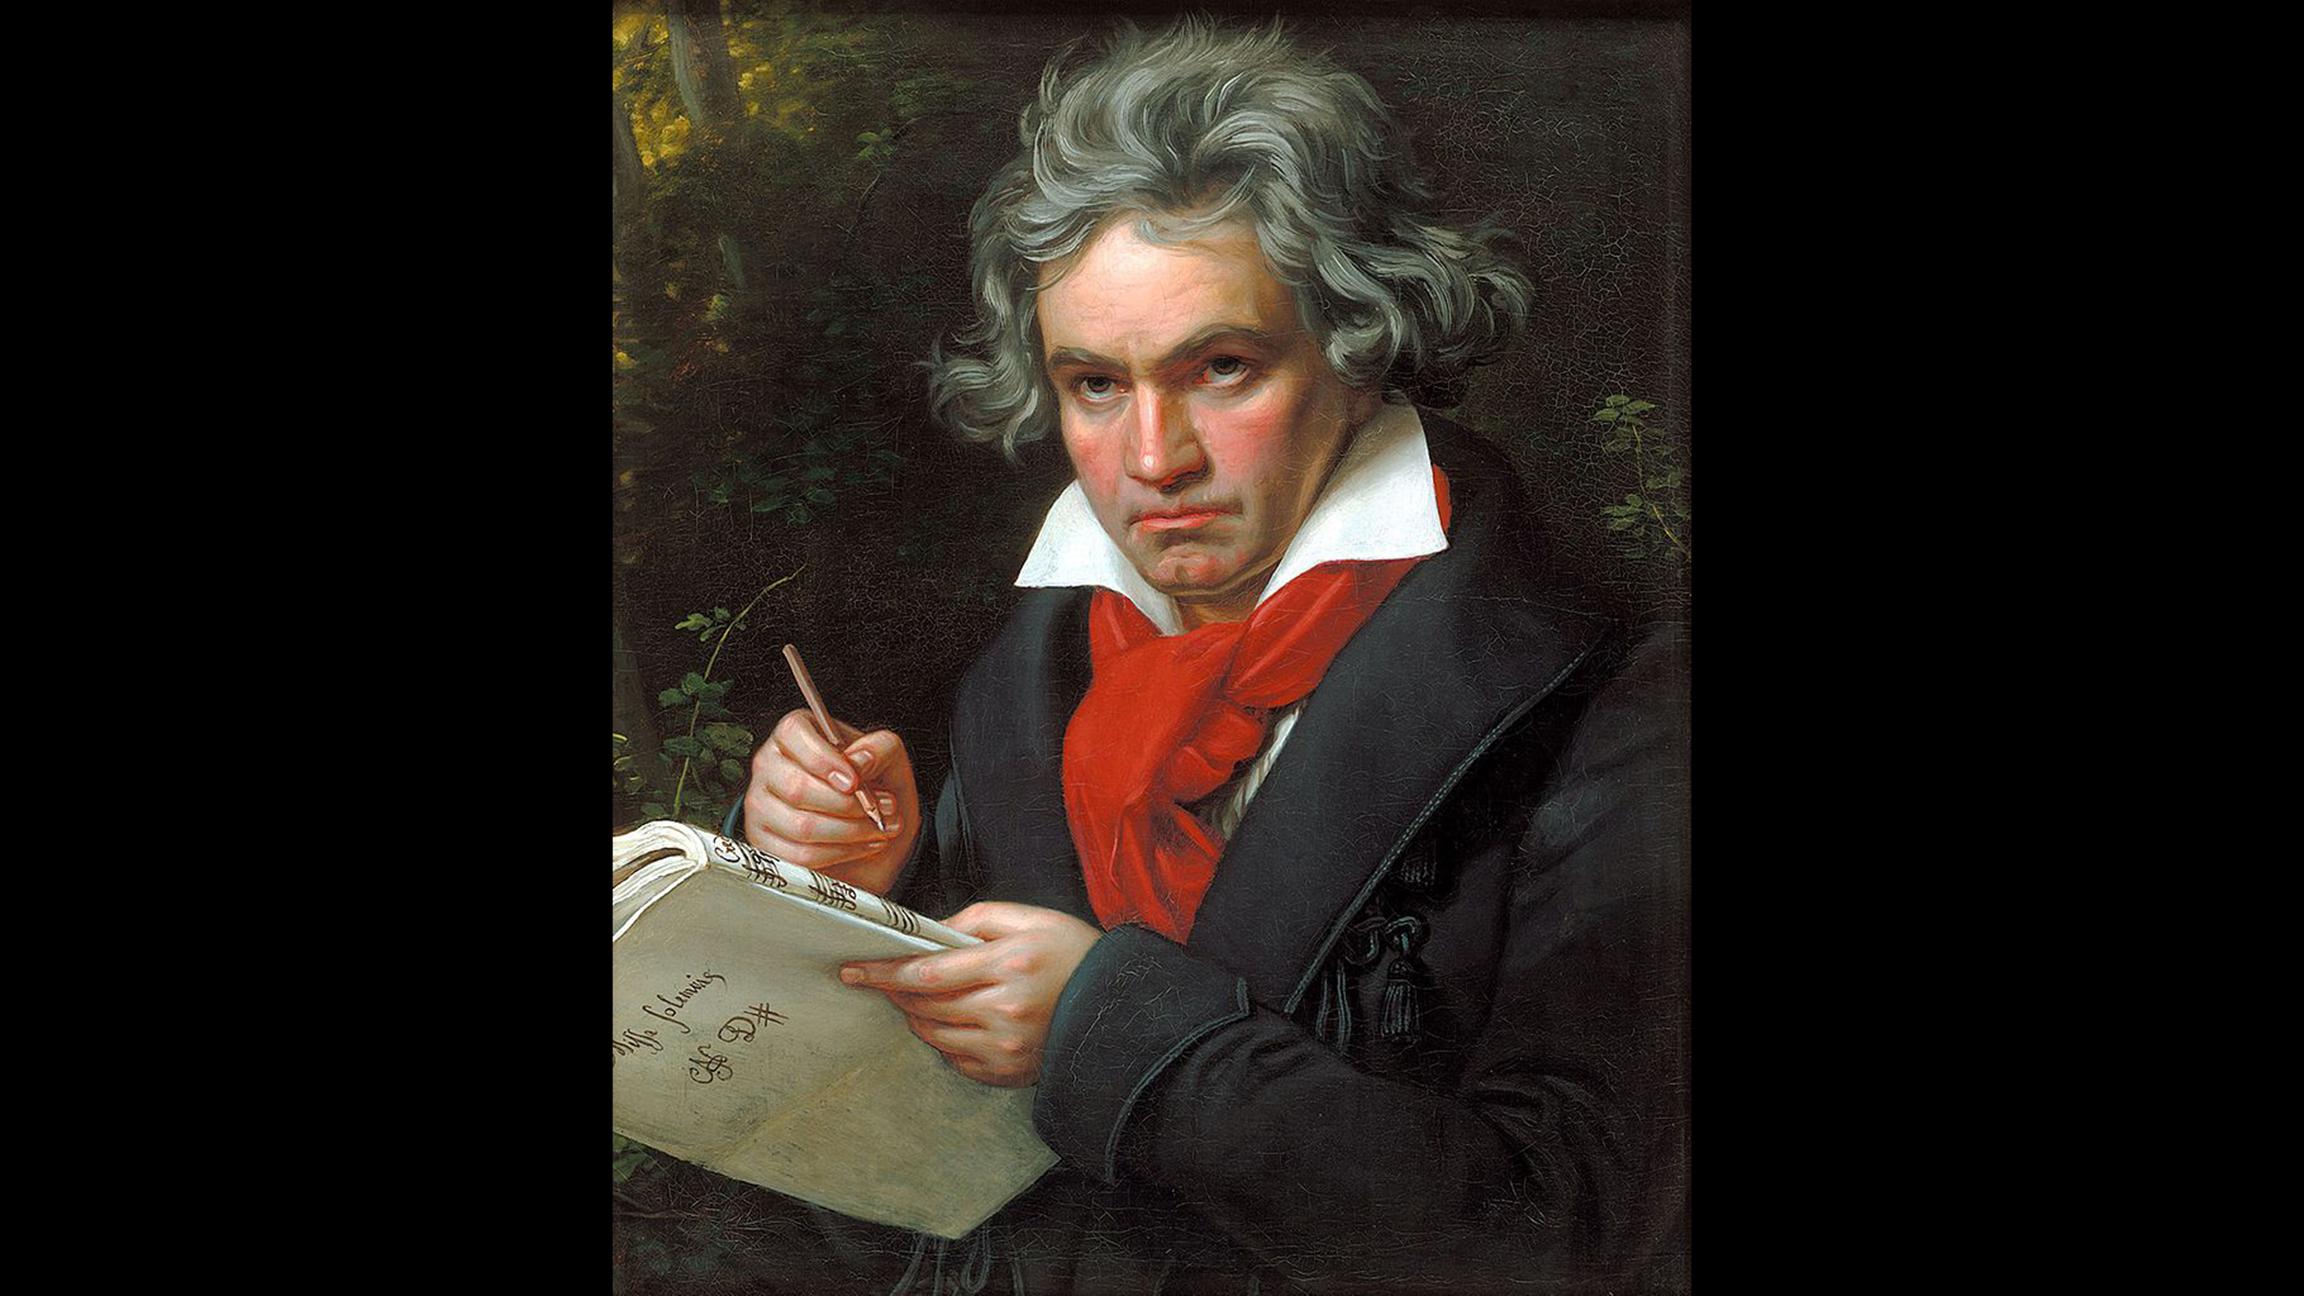 Yet he doesn’t look a day over 200: Celebrate Beethoven’s 246th birthday Friday.